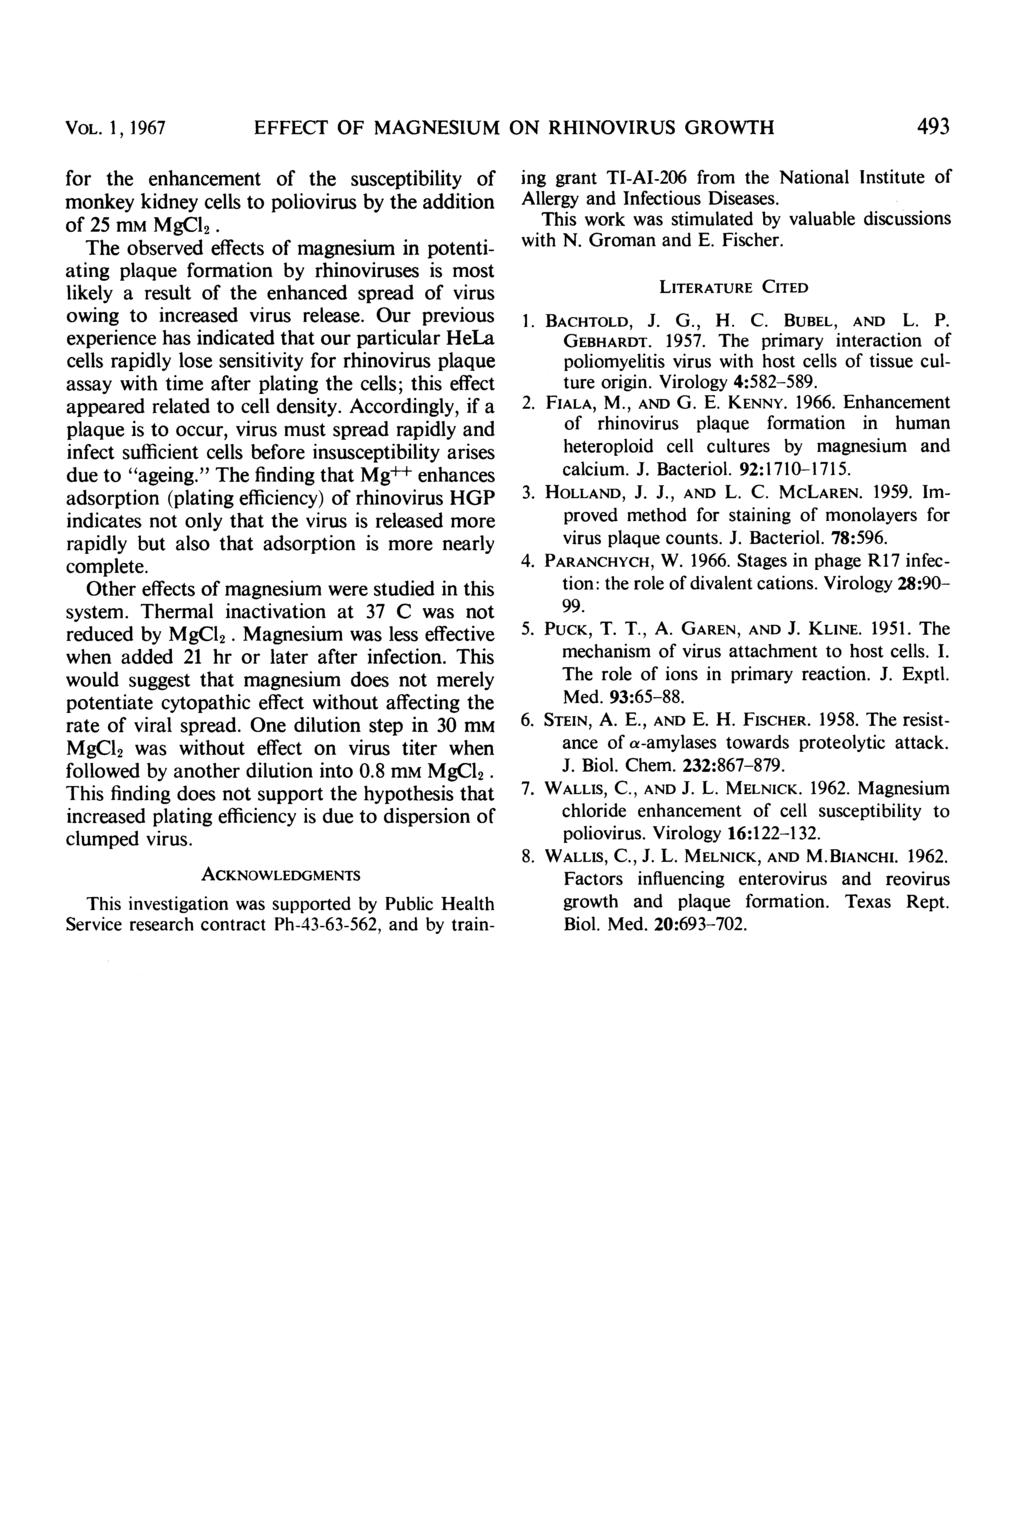 VOL. 1, 1967 EFFECT OF MAGNESIUM ON RHINOVIRUS GROWTH 493 for the enhancement of the susceptibility of monkey kidney cells to poliovirus by the addition of 25 mm MgC12.